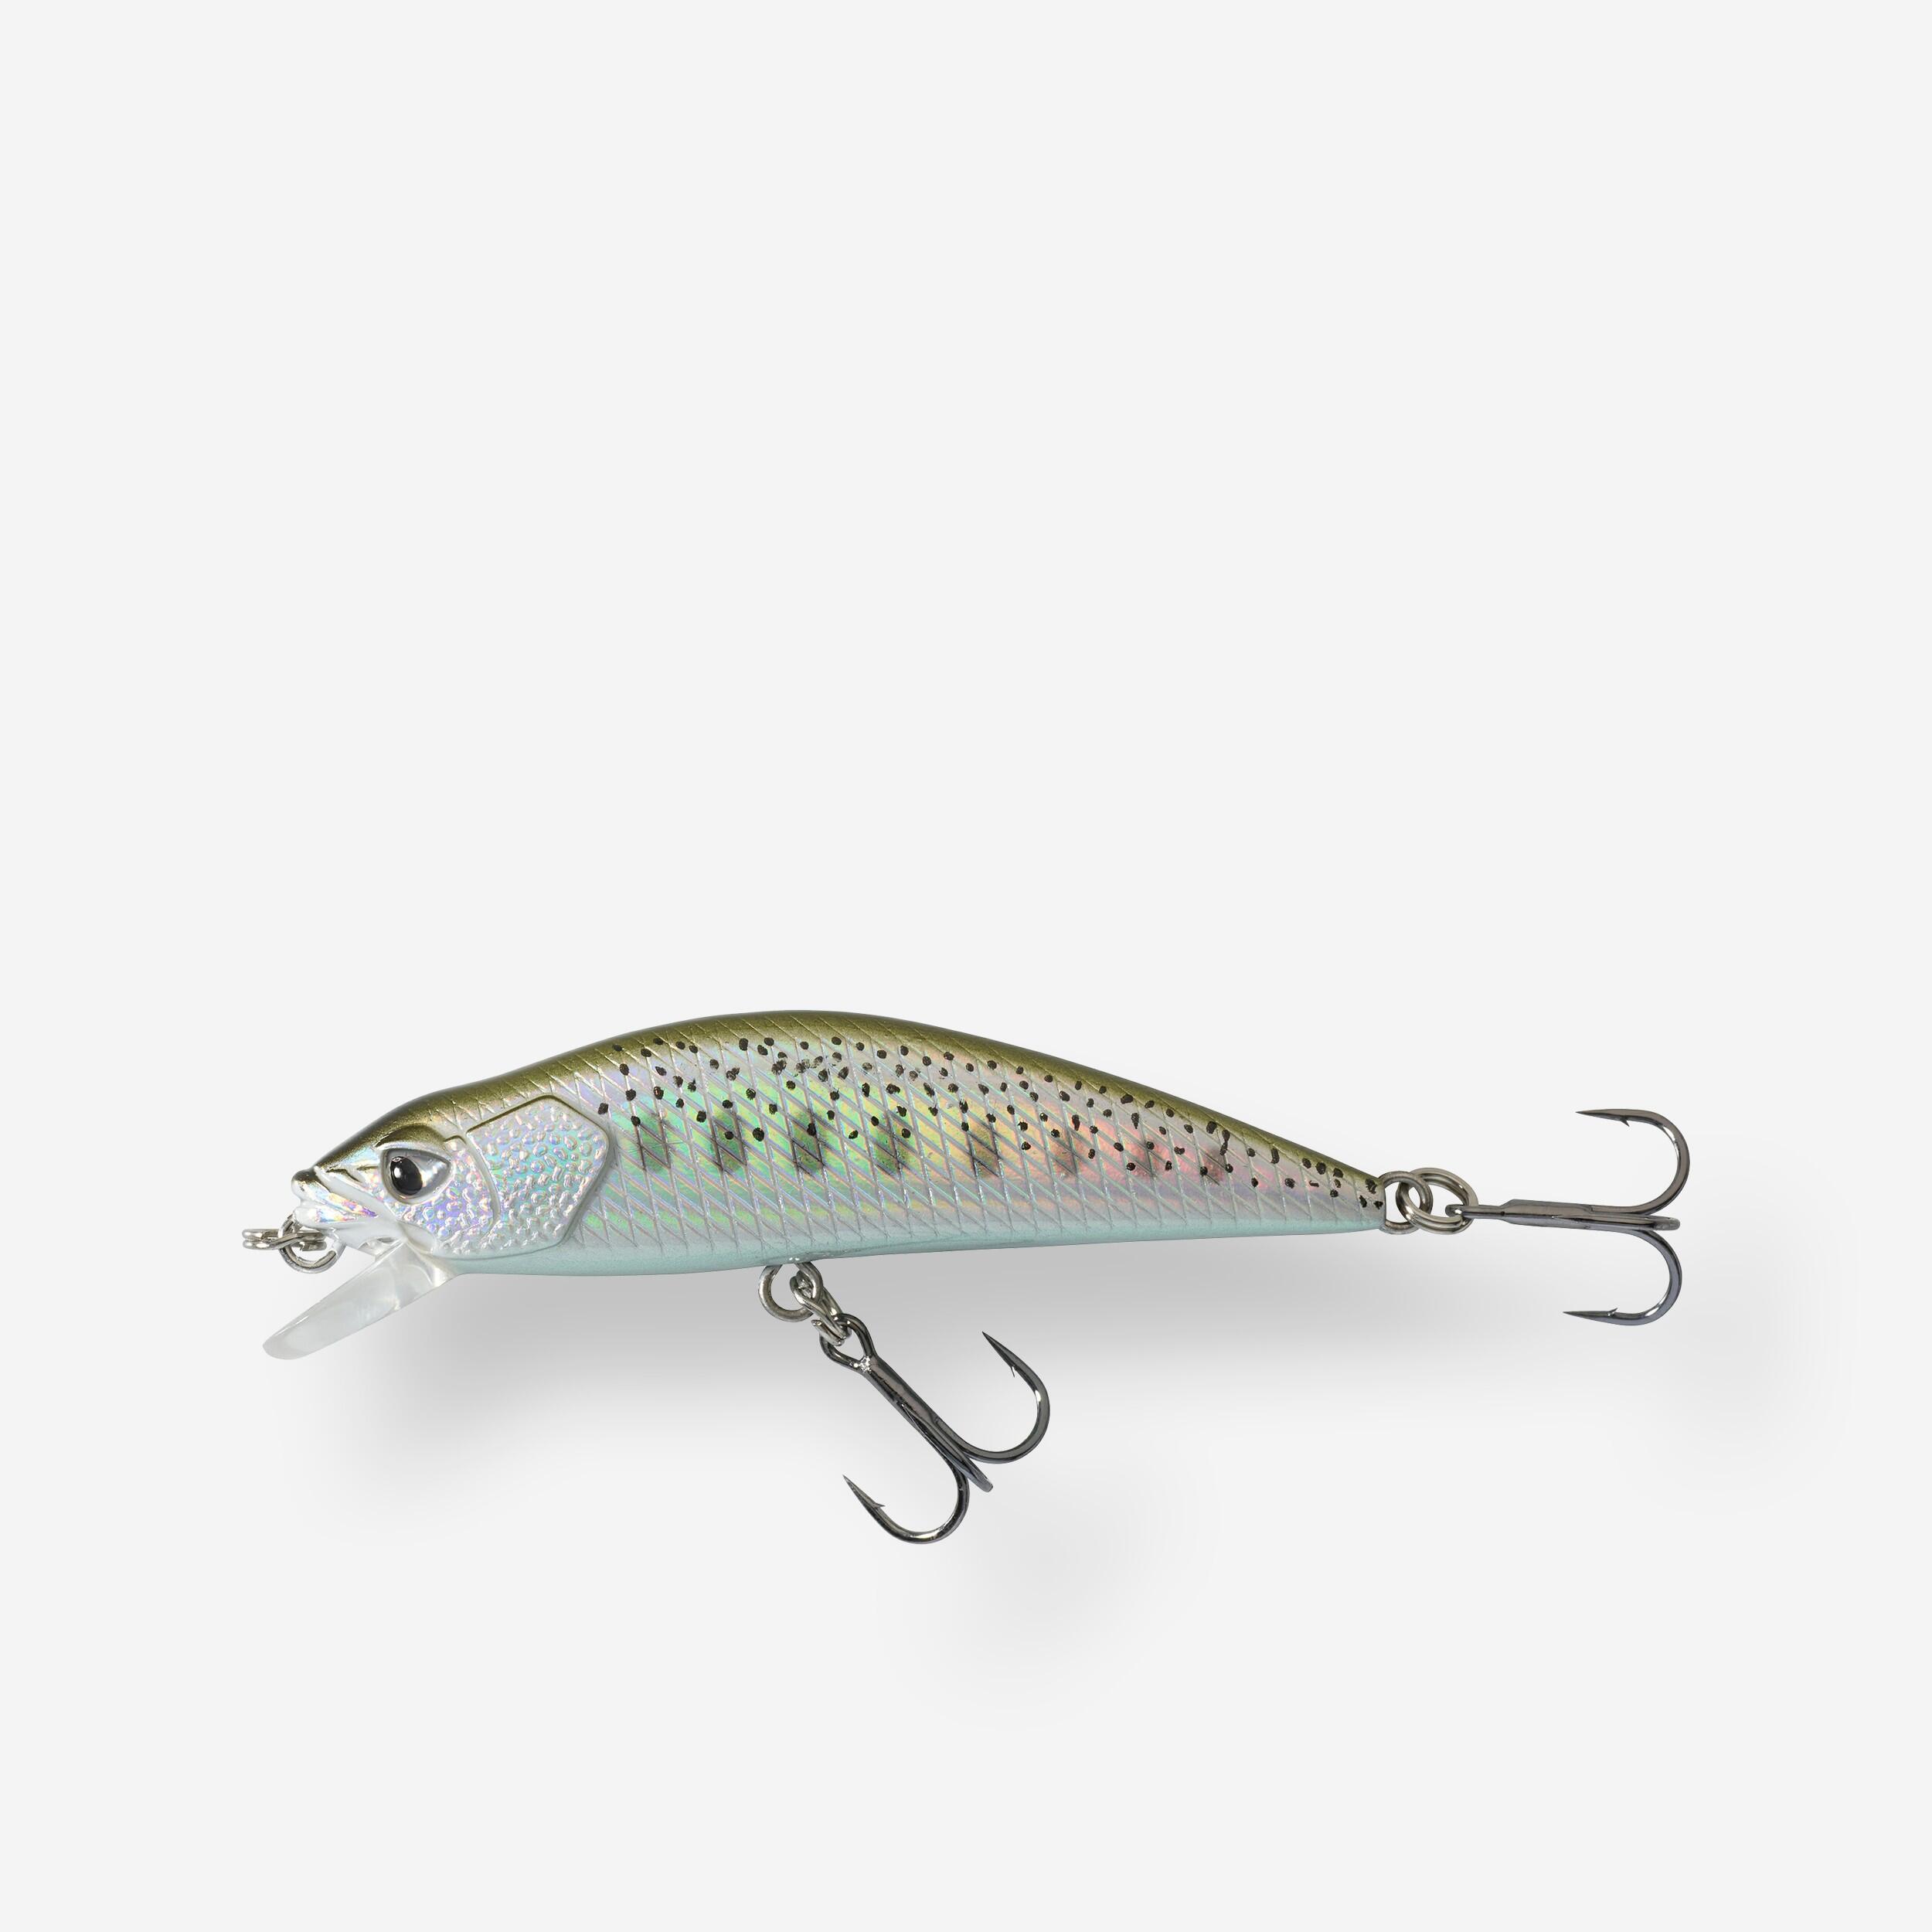 CAPERLAN MINNOW HARD LURE FOR TROUT WXM  MNWFS US 65 YAMAME